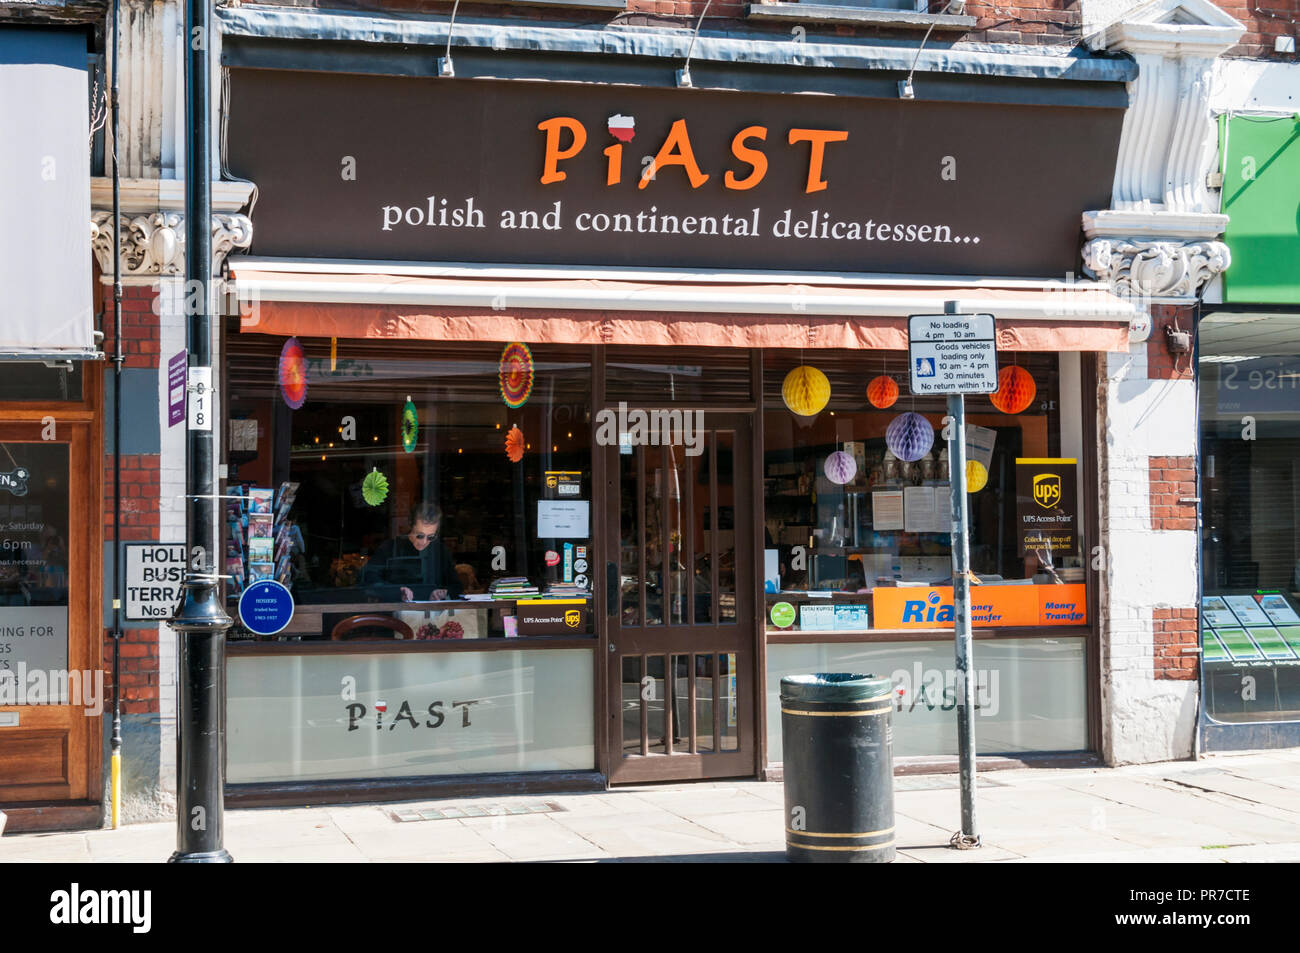 Piast Polish and continental delicatessen in Crystal Palace, South London. Stock Photo